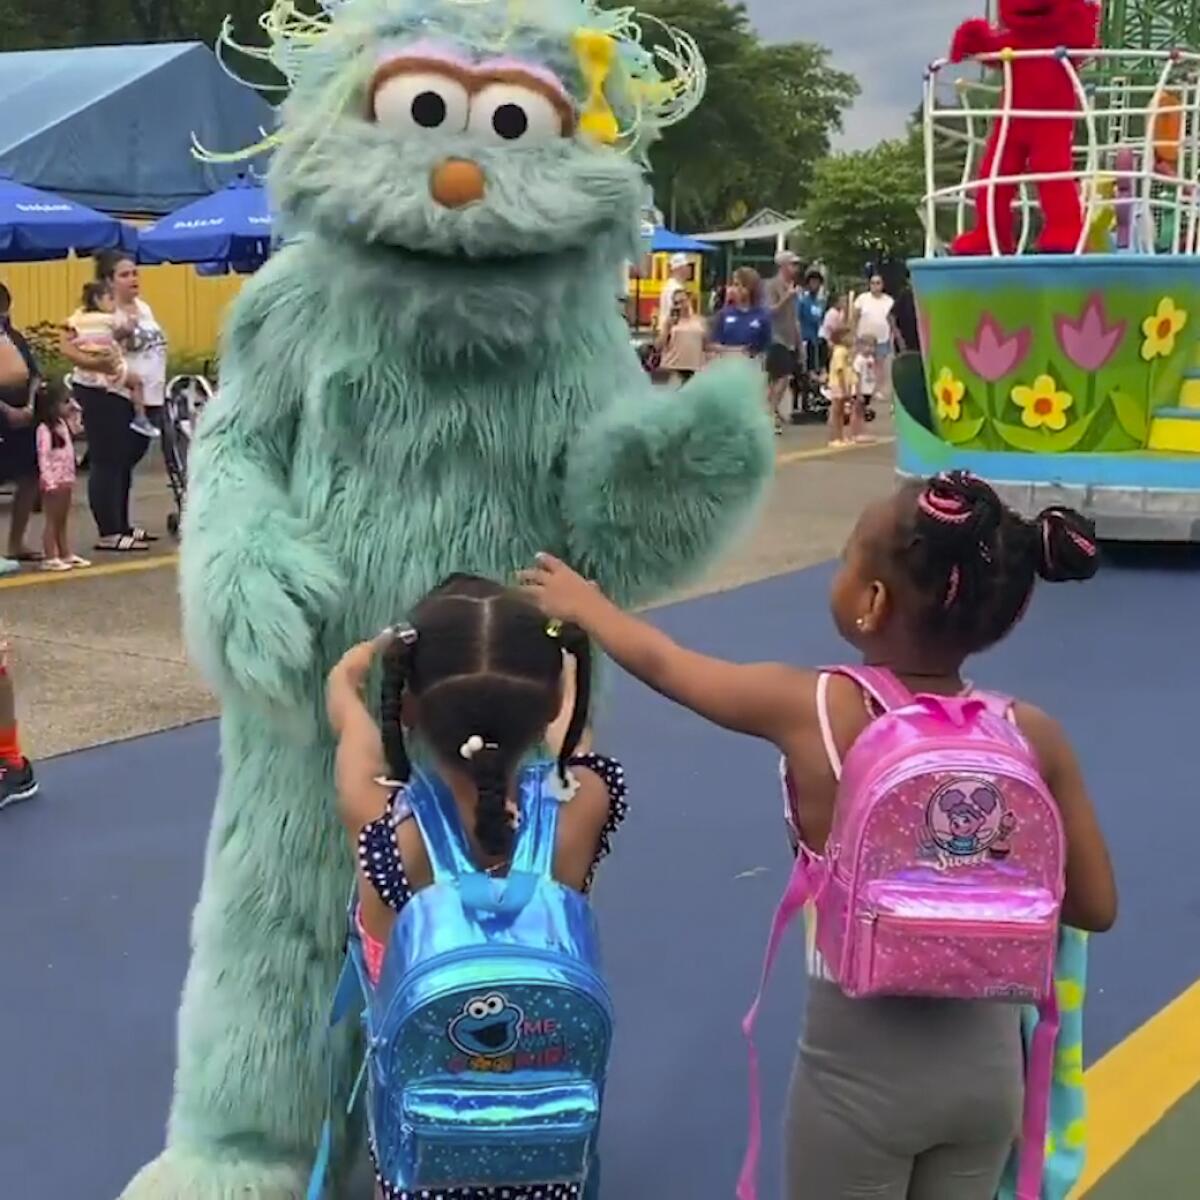 A person in a large, fluffy costume looks down at two little girls reaching out to them